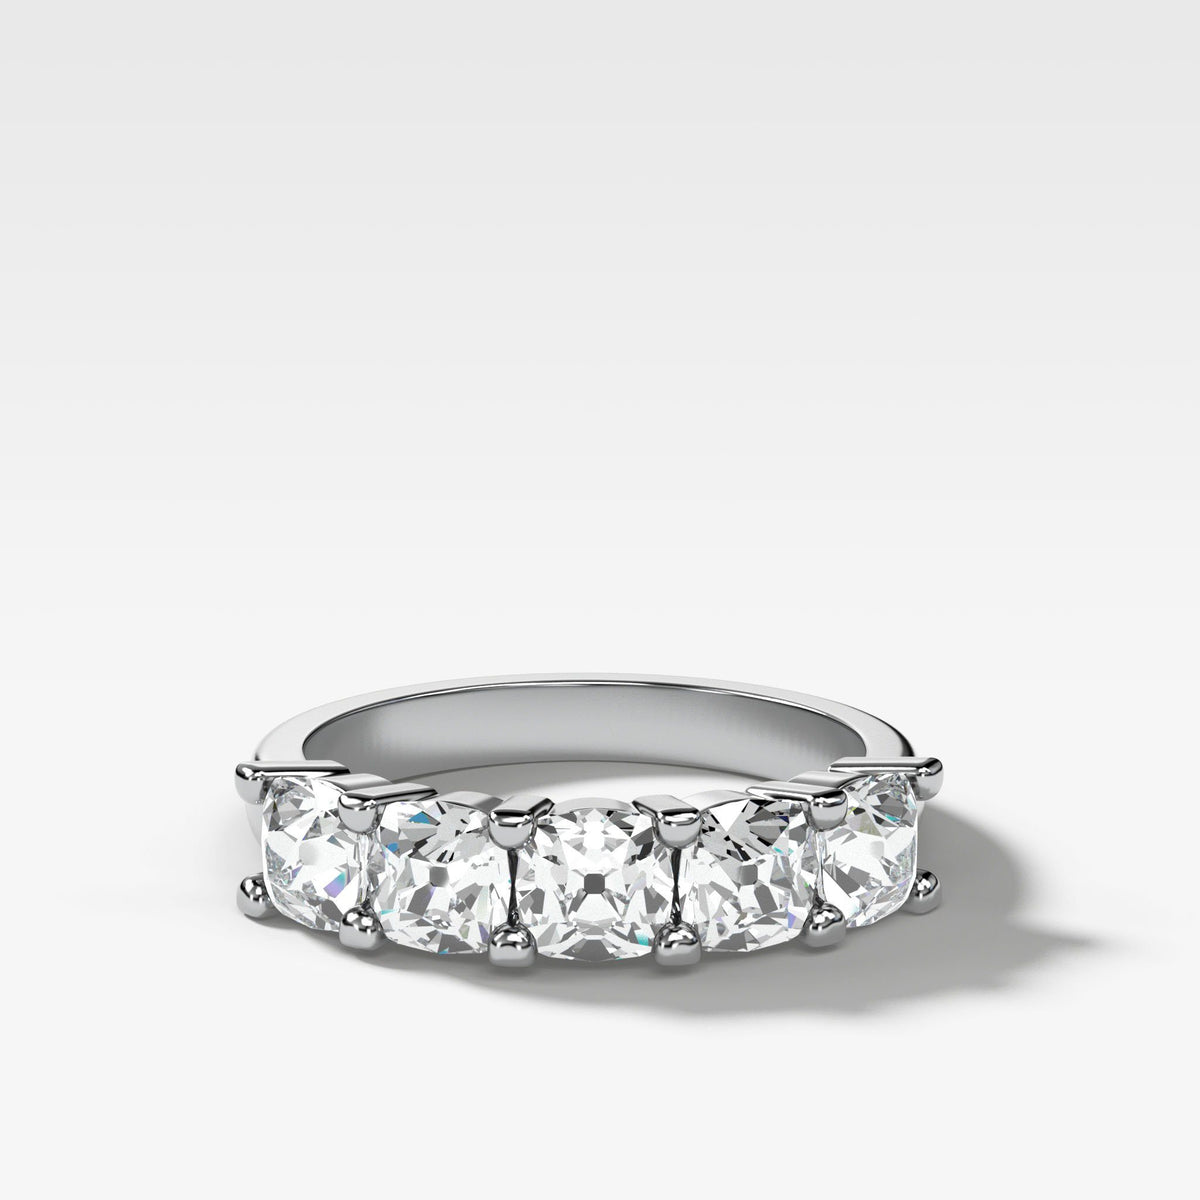 Five Stone Shared Prong Diamond Band With Old Mine Cuts (1.65ctw) by Good Stone available in Gold and Platinum